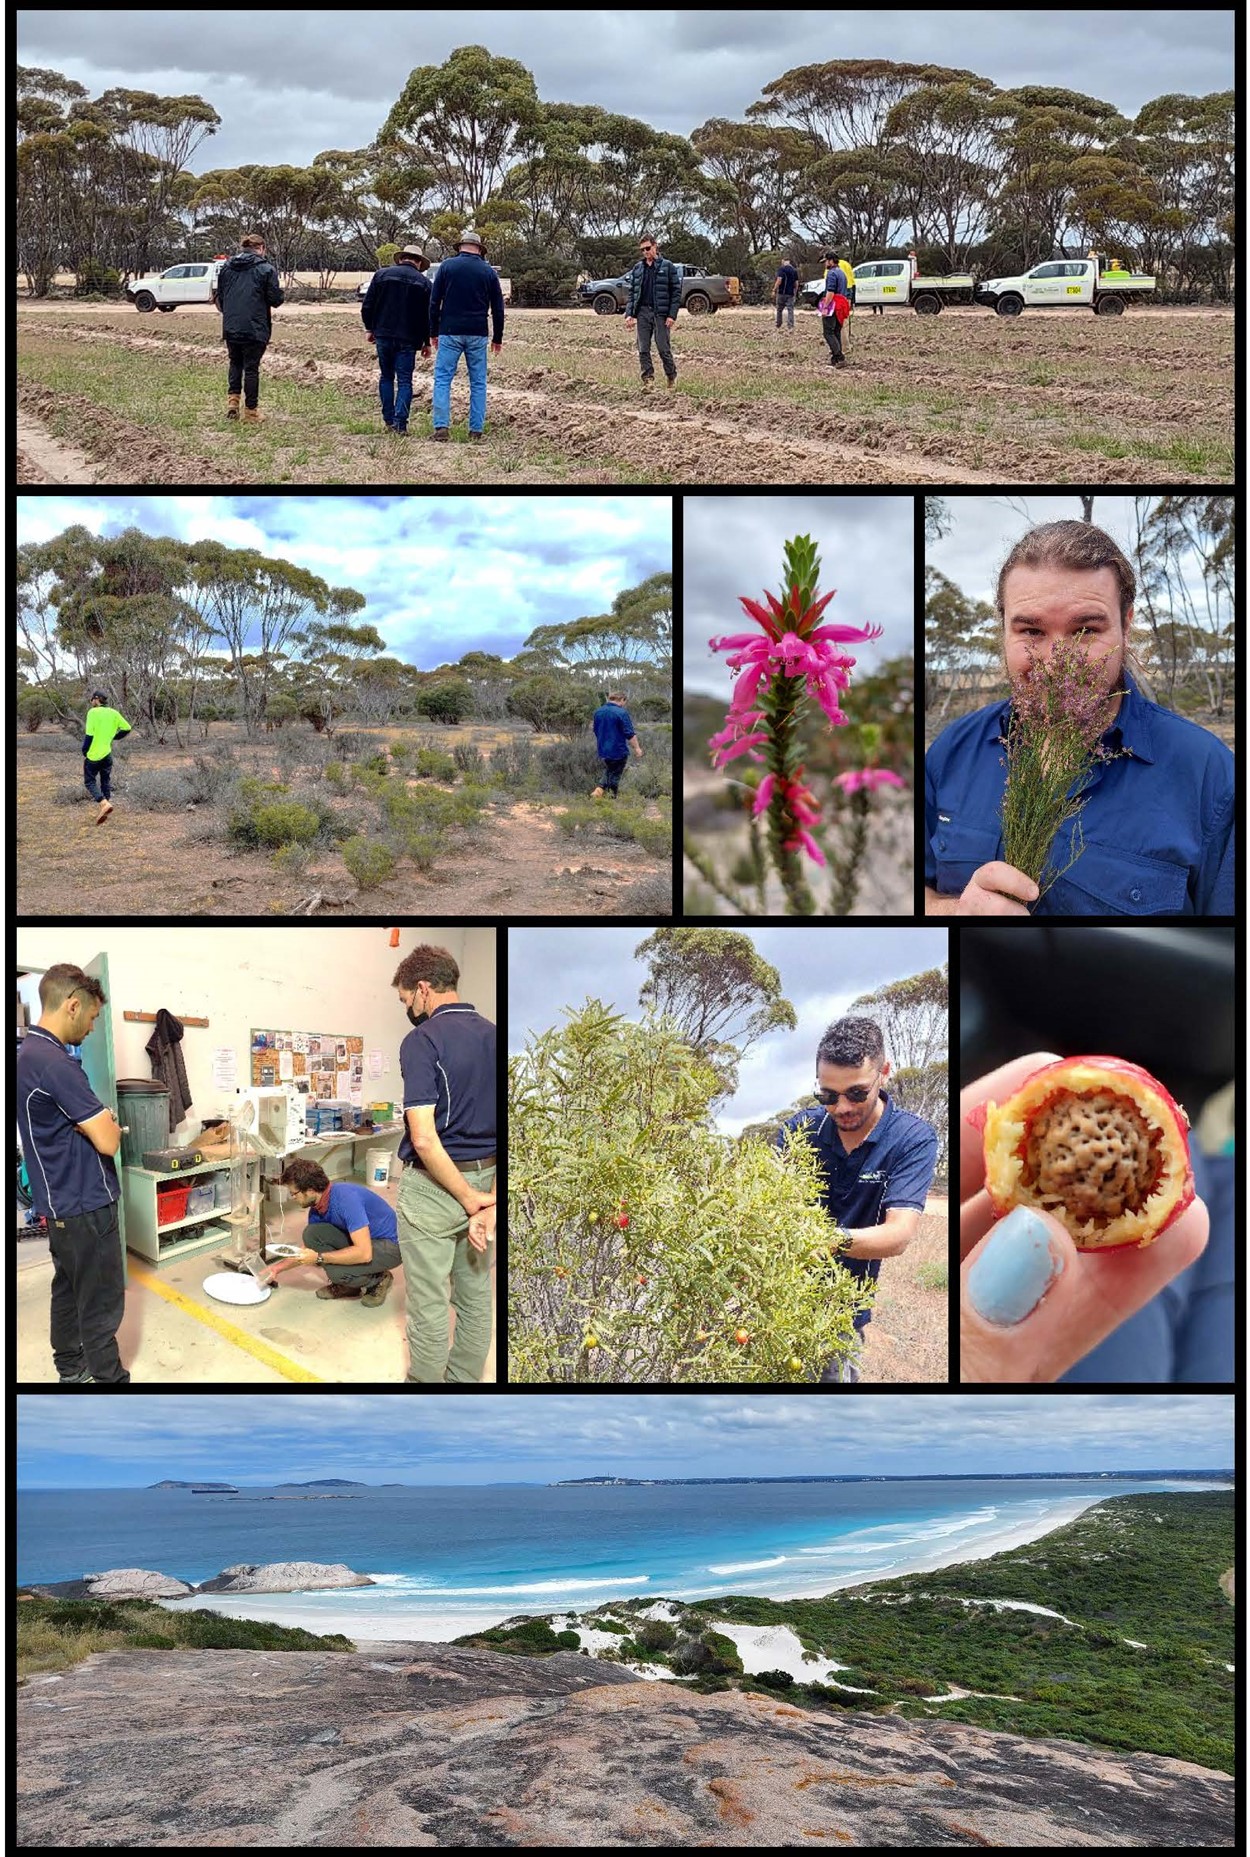 Left to right from top: Assessing the seeding from earlier in the year; Trevor and Michael surveying remnant vegetation; the striking Spiked Eremophila (Eremophila calorhabdos); Michael with Bale-hook Eremophila (Eremophila dicroantha); Simone demonstrates a seed cleaning technique to Lachlan and Sean; Lachlan picking quandong (Santalum acuminatum) fruits; Haylee’s first taste of Quandong; gorgeous views of the Esperance Bay from Wylie Bay Rock